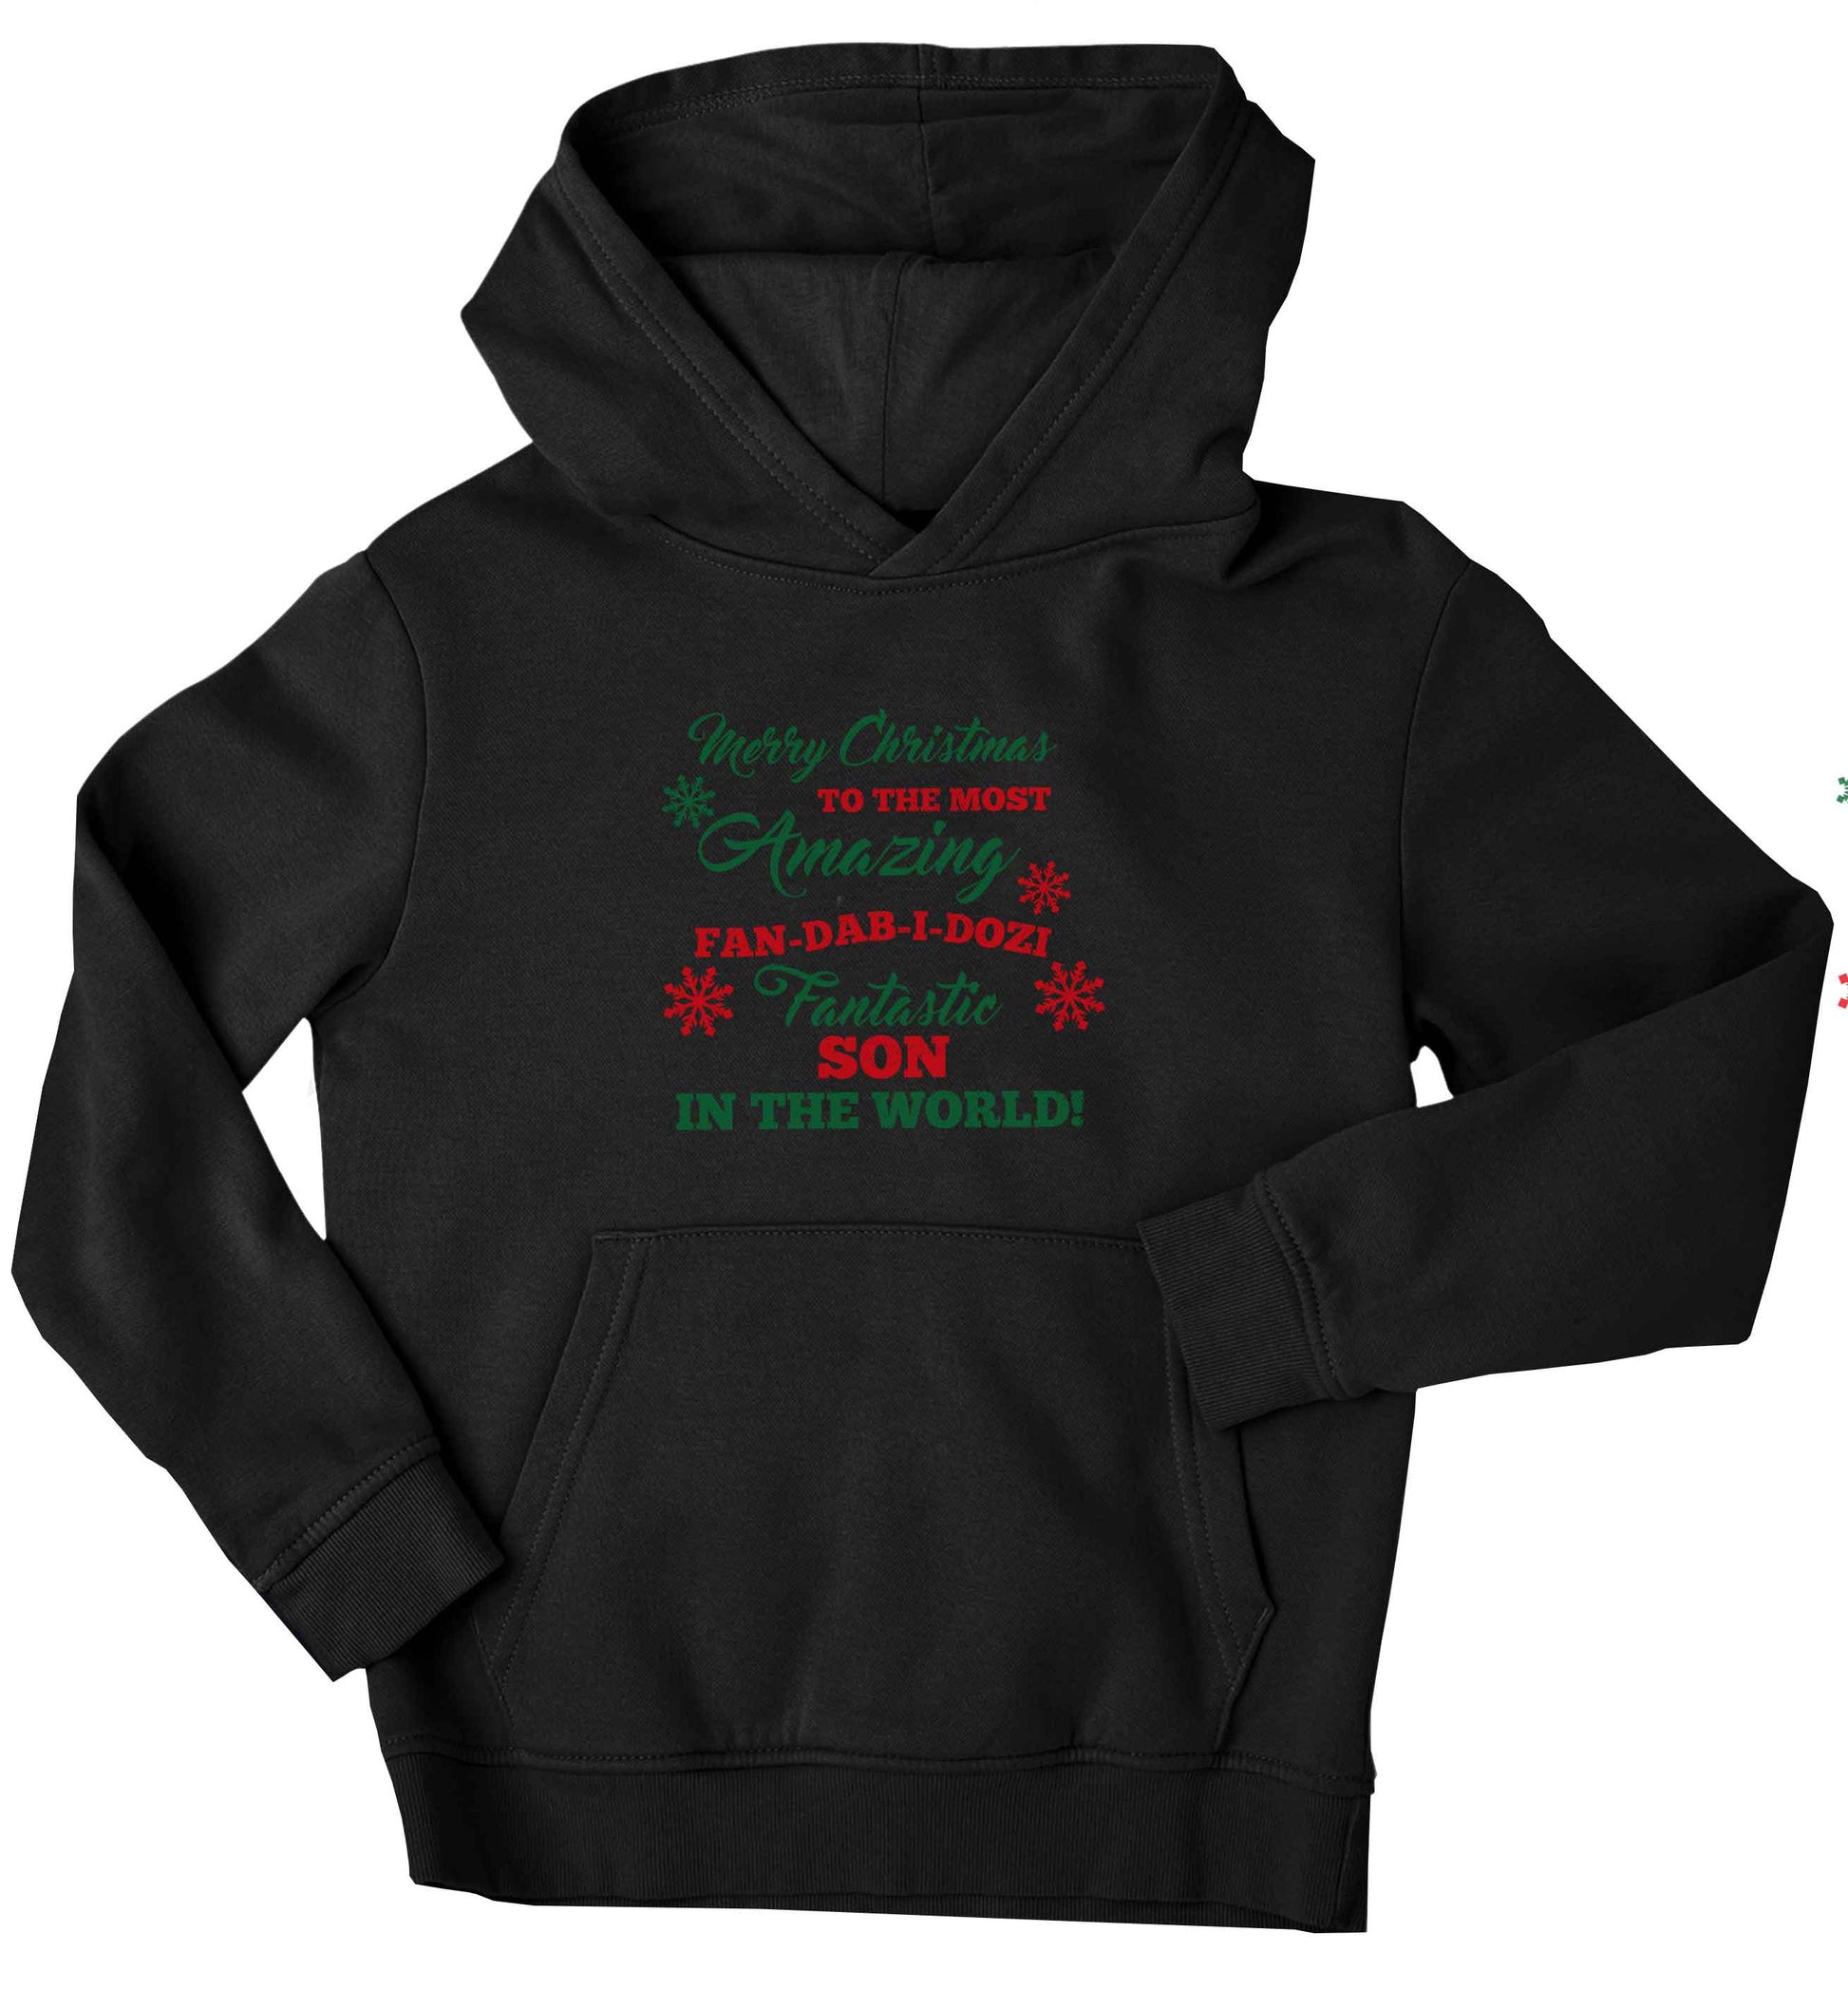 Merry Christmas to the most amazing fan-dab-i-dozi fantasic Son in the world children's black hoodie 12-13 Years